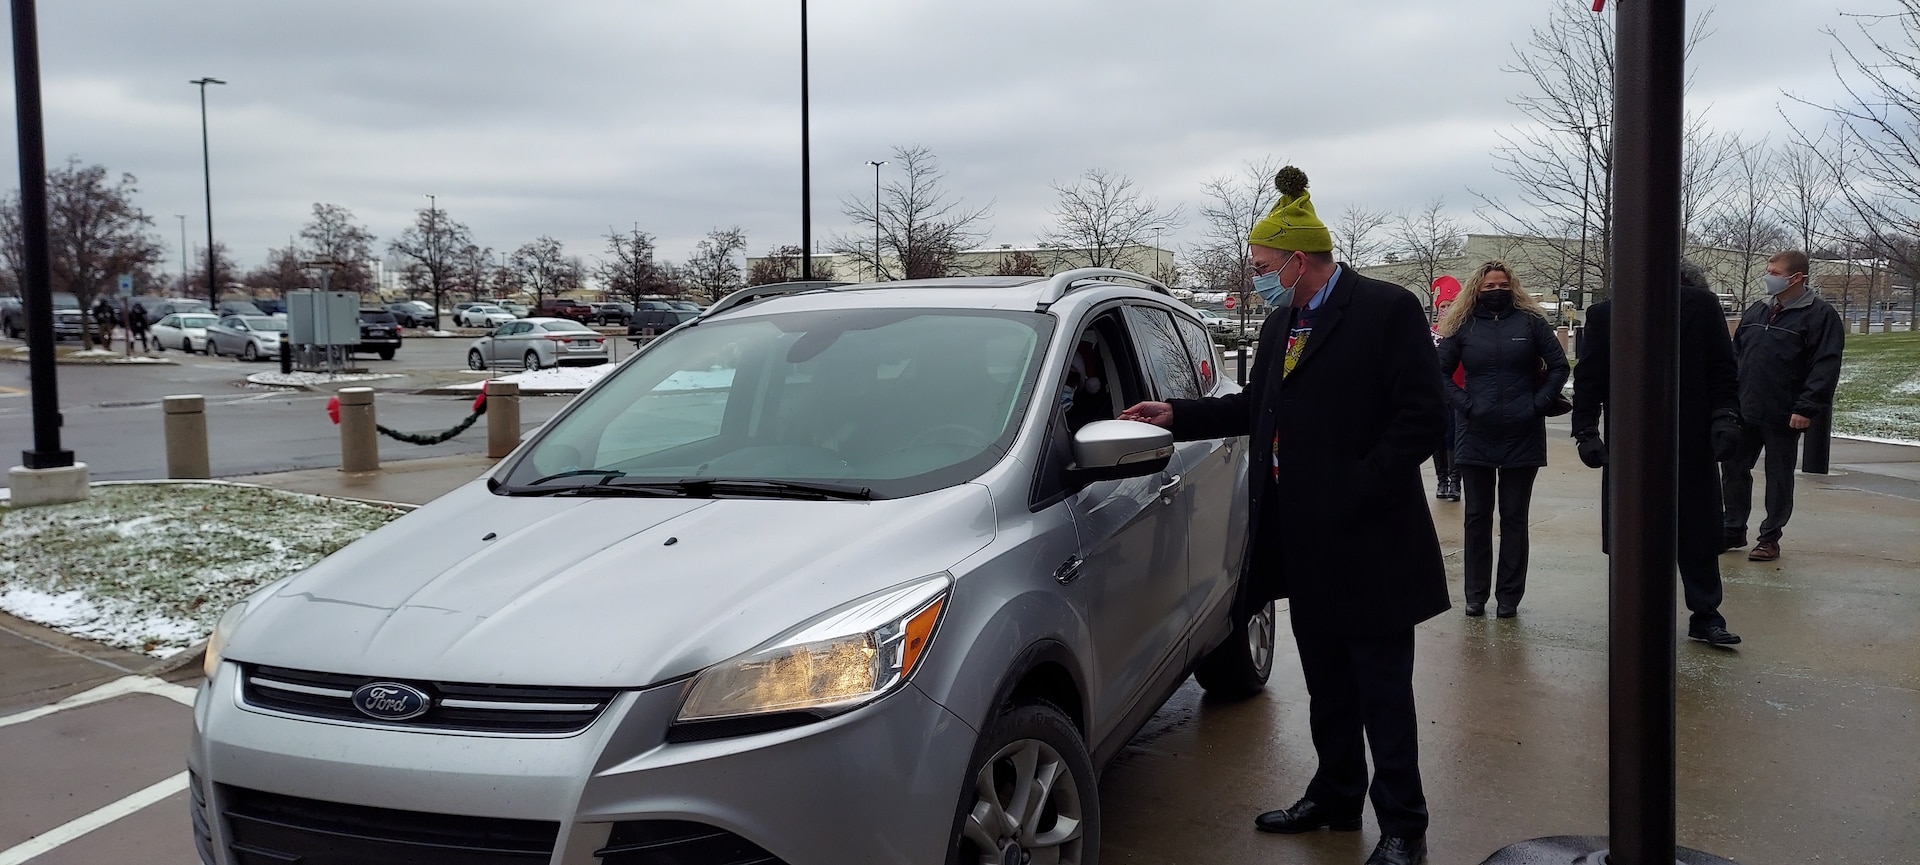 DLA Land and Maritime Director of Operations Griff Warren greets a person in a car. He is wearing a Grinch hat.